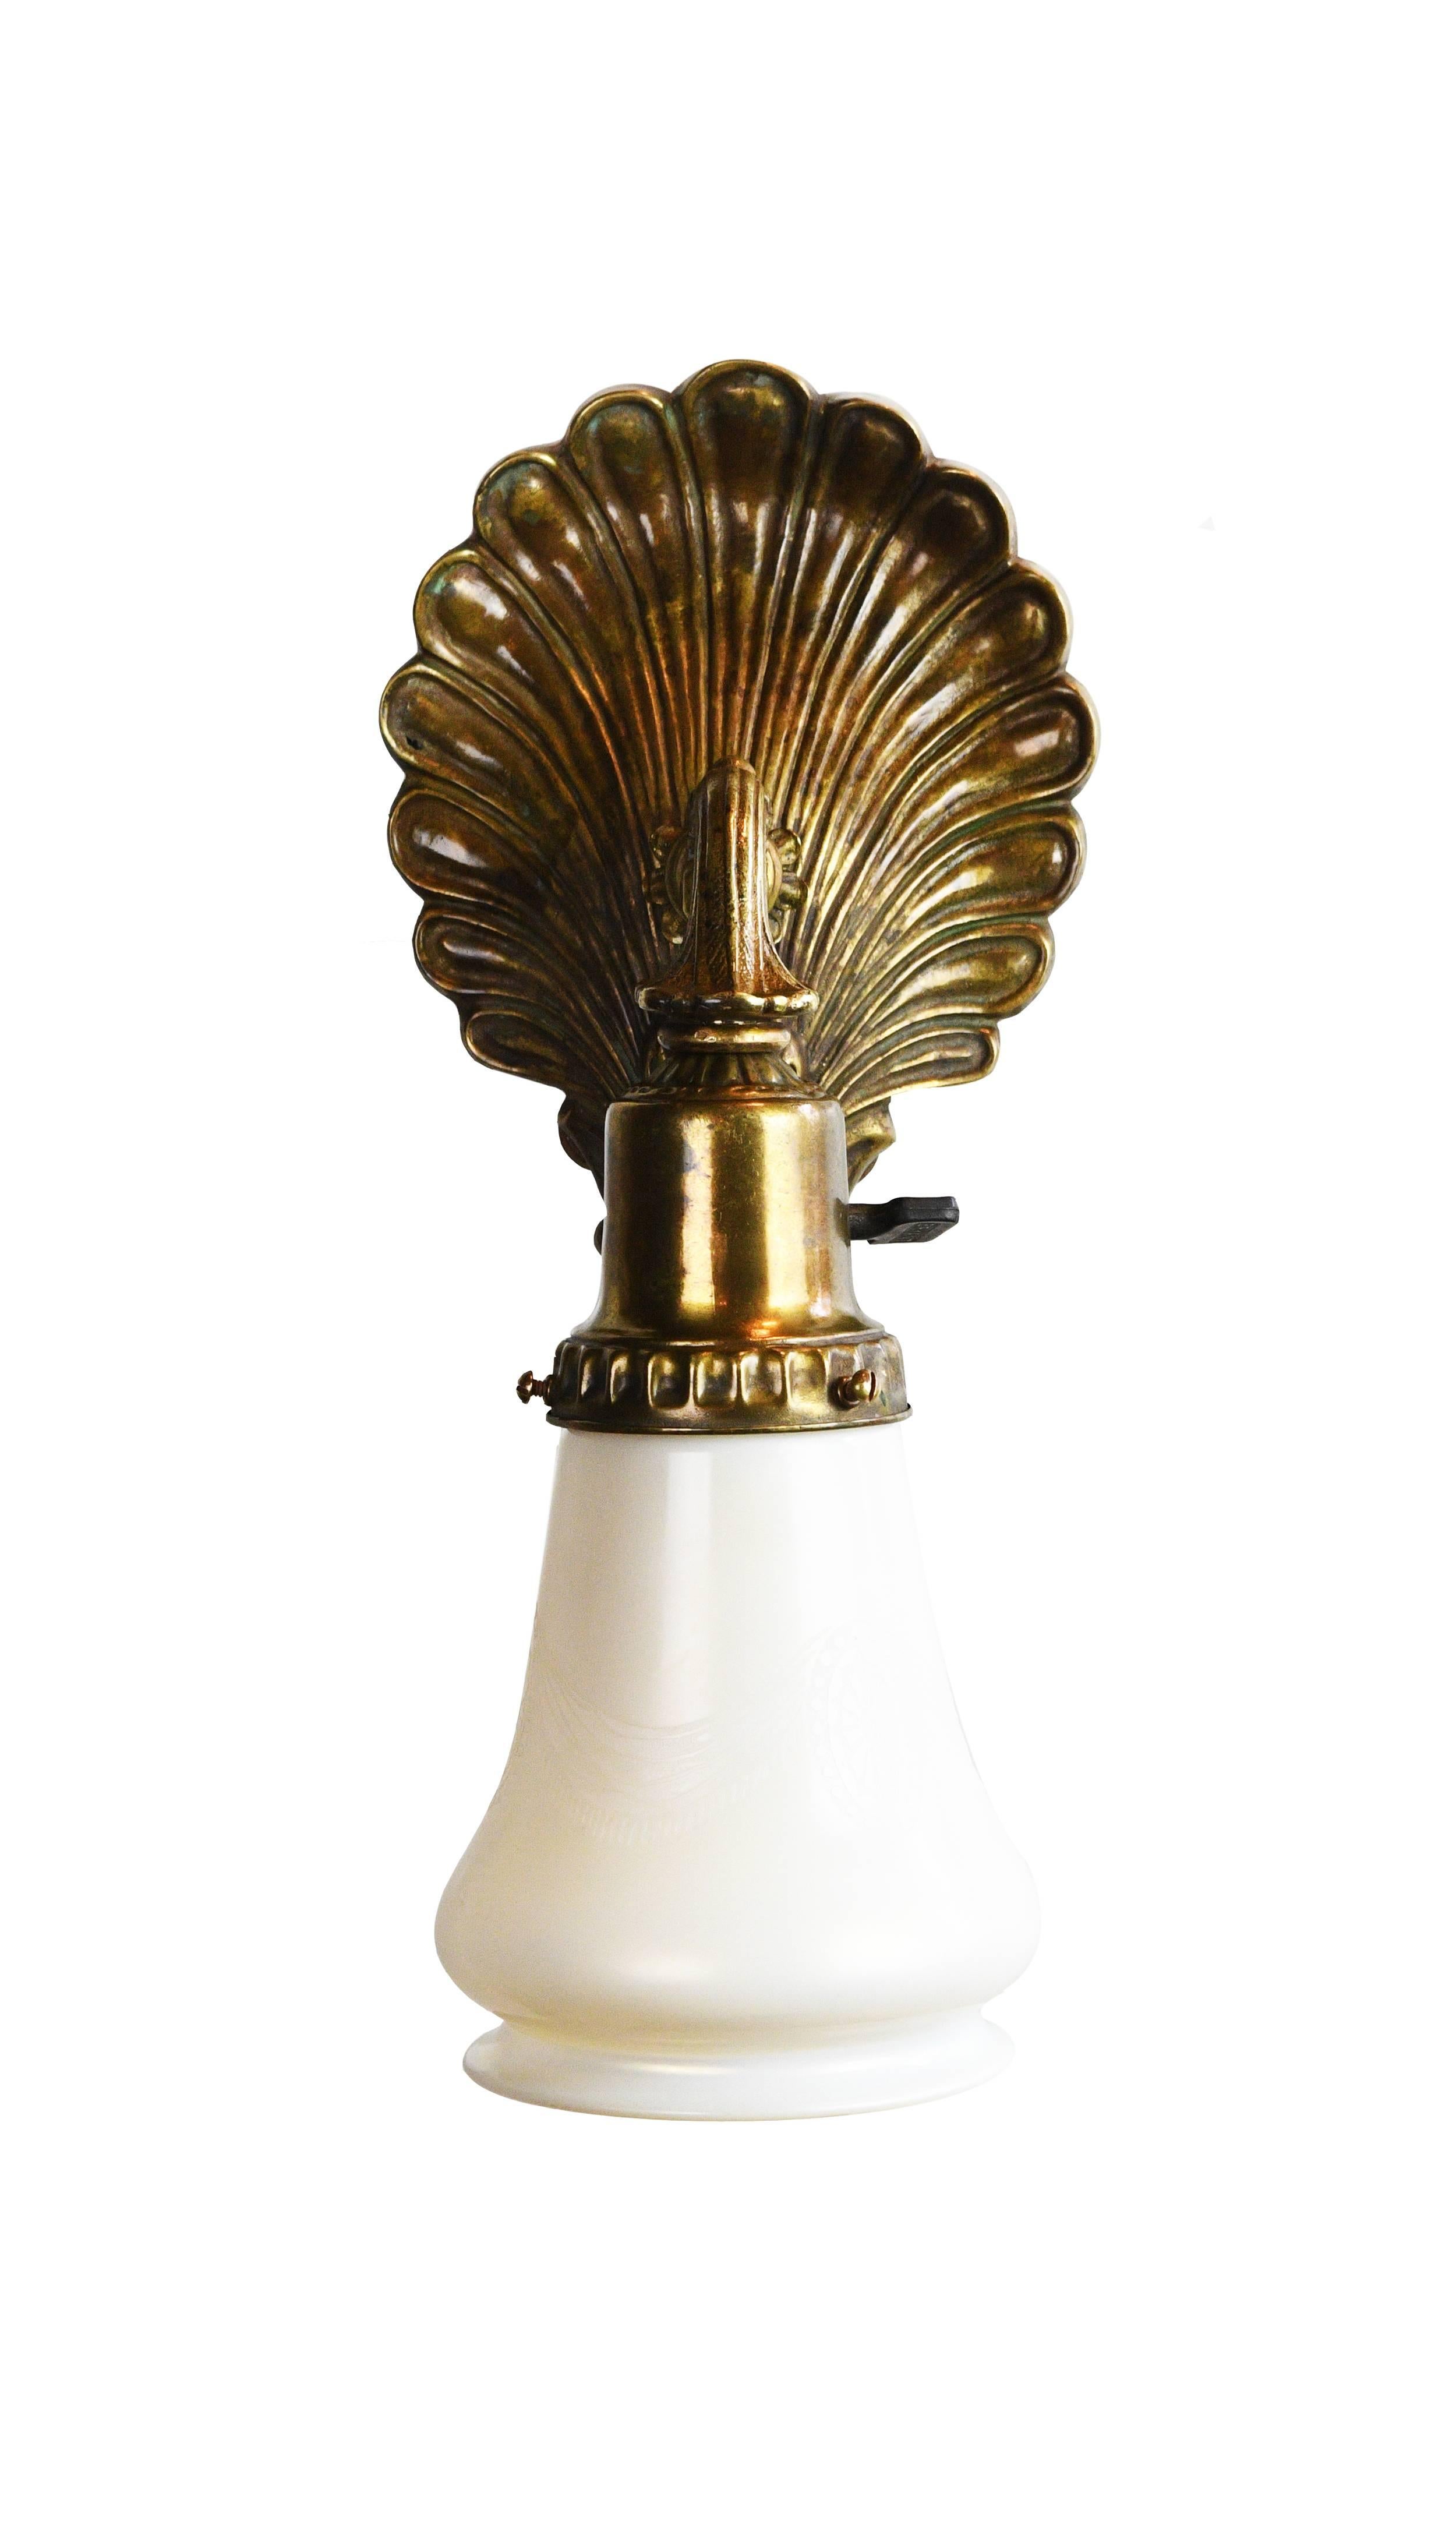 This beautiful brass Pullman train sconce has patterns consisting of organic shapes and curving lines. The design is sophisticated while remaining its simplicity. The Steuben shade is etched with subtle patterns,

circa 1925
Condition: